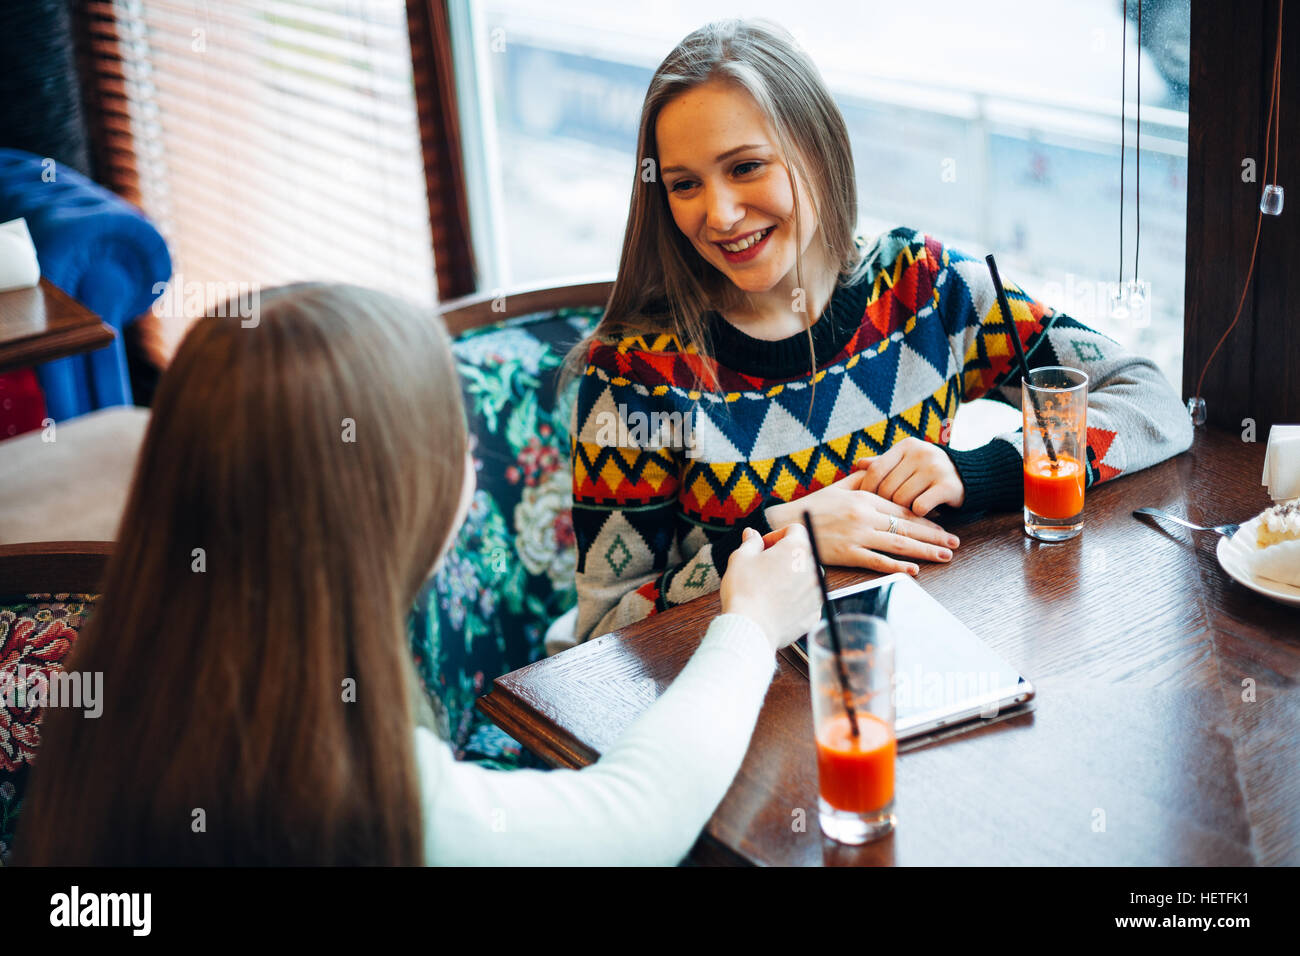 Girl friends communicate in a cafe Stock Photo